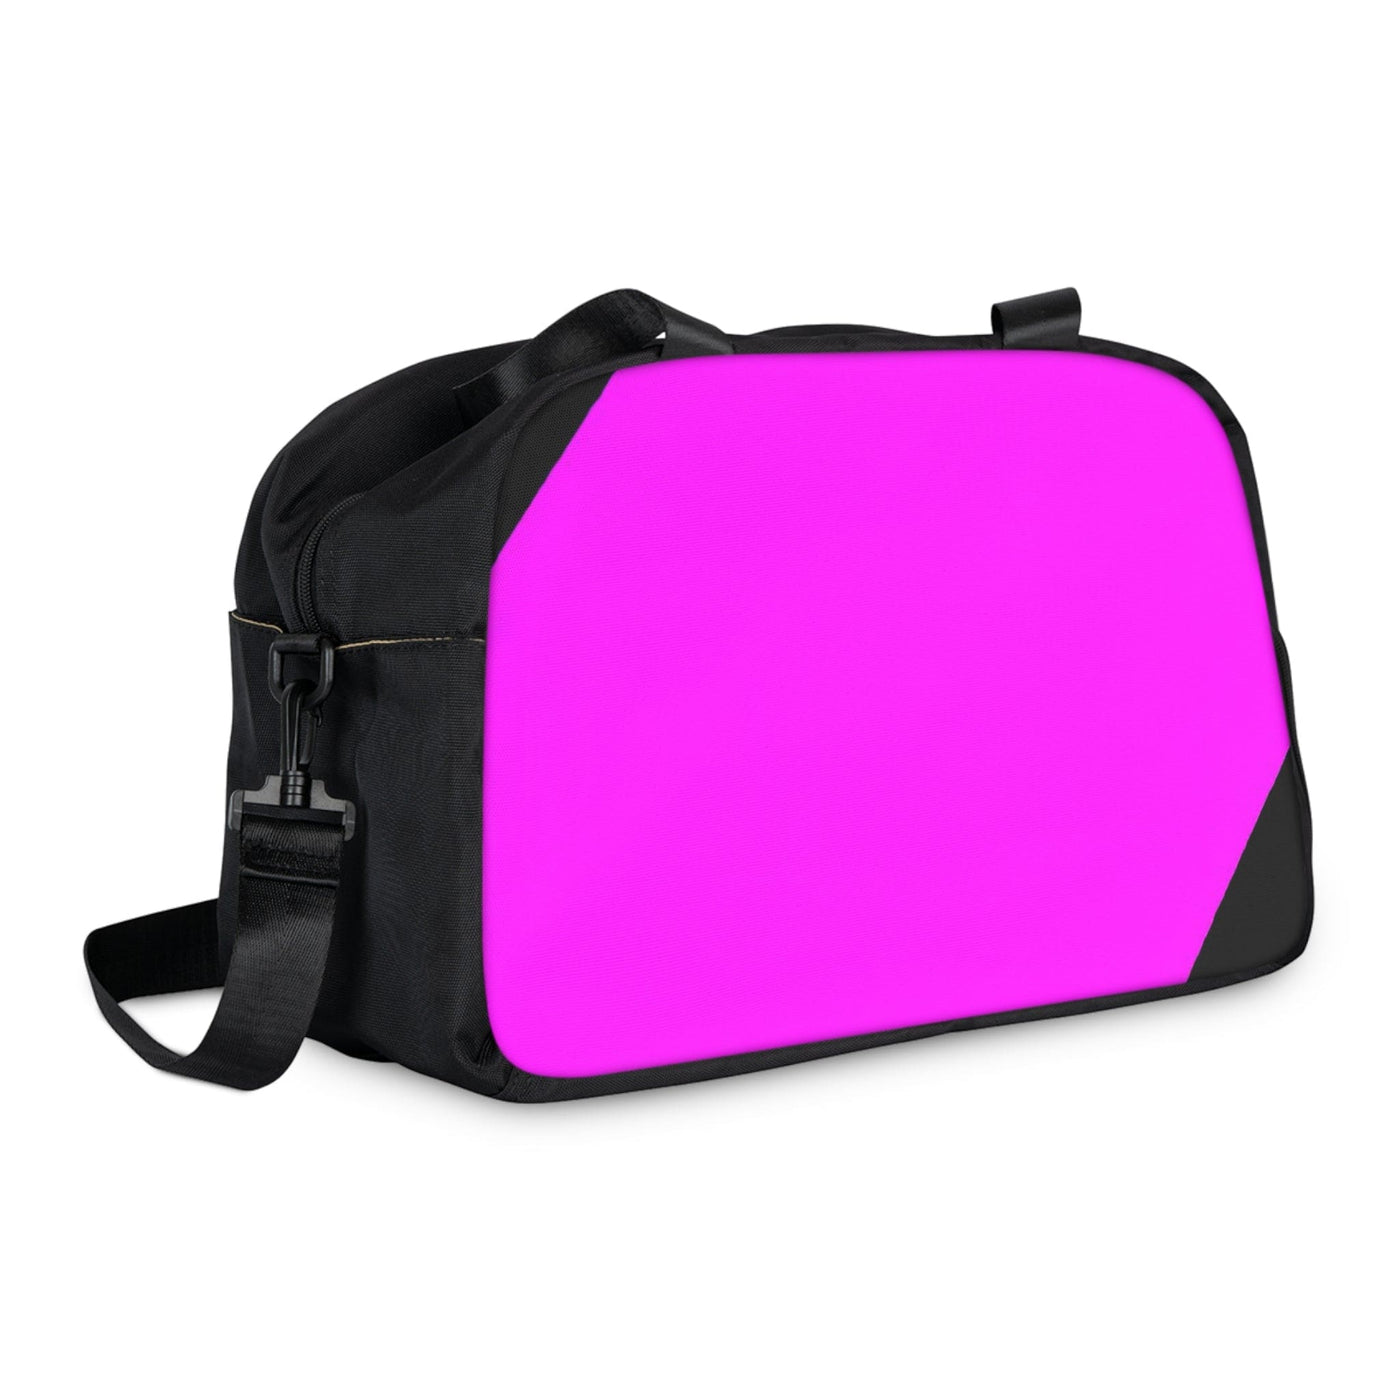 Travel Fitness Bag Black And Pink Pattern - Bags